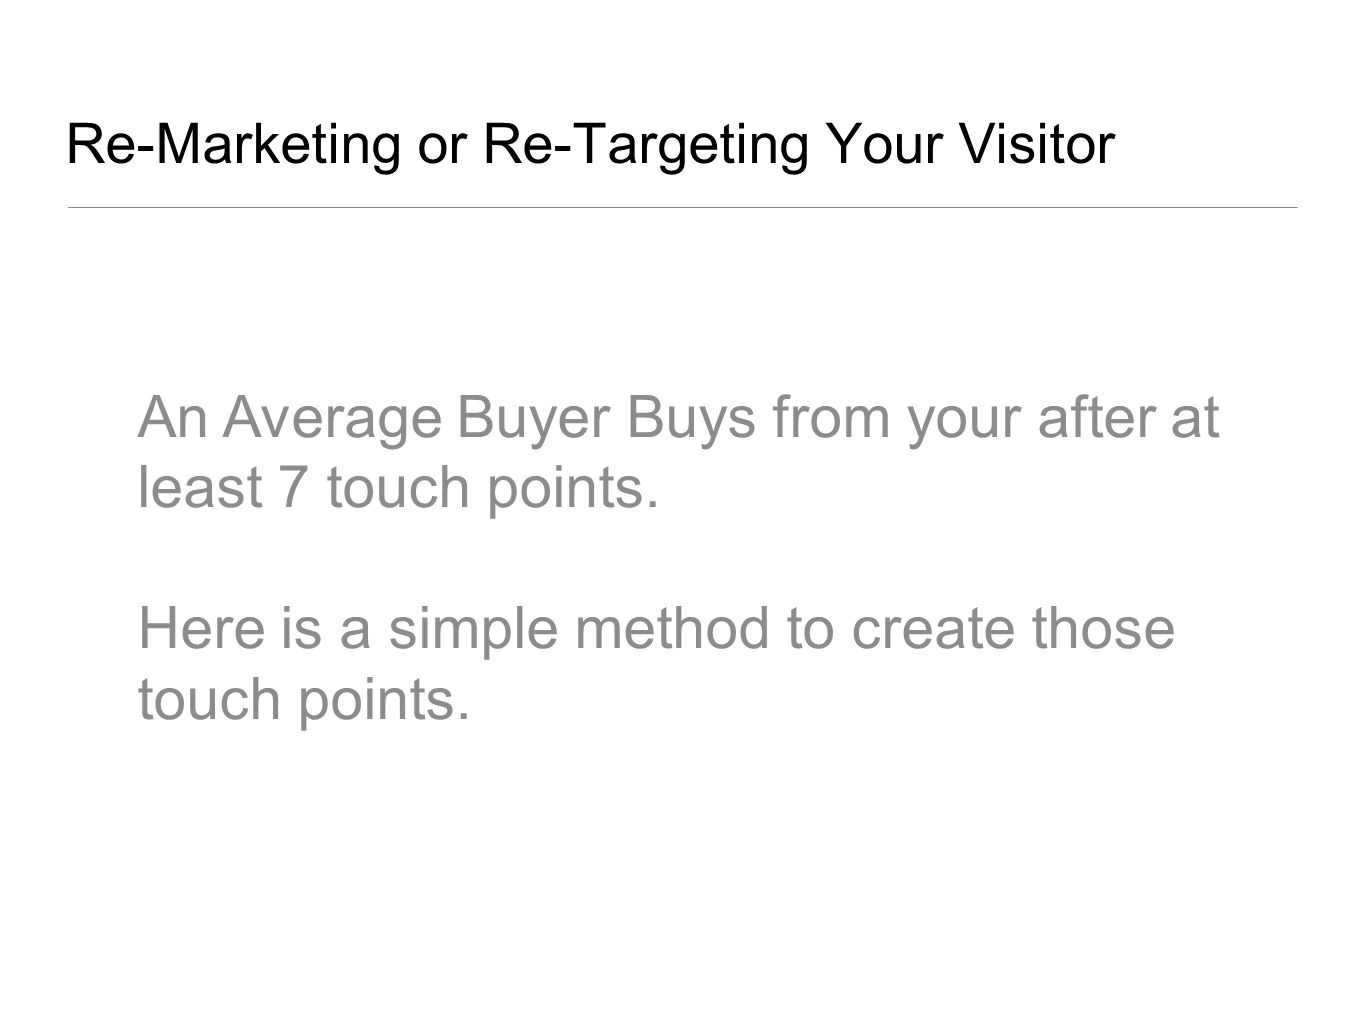 Re-Marketing or Re-Targeting Your Visitor An Average Buyer Buys from your after at least 7 touch points.